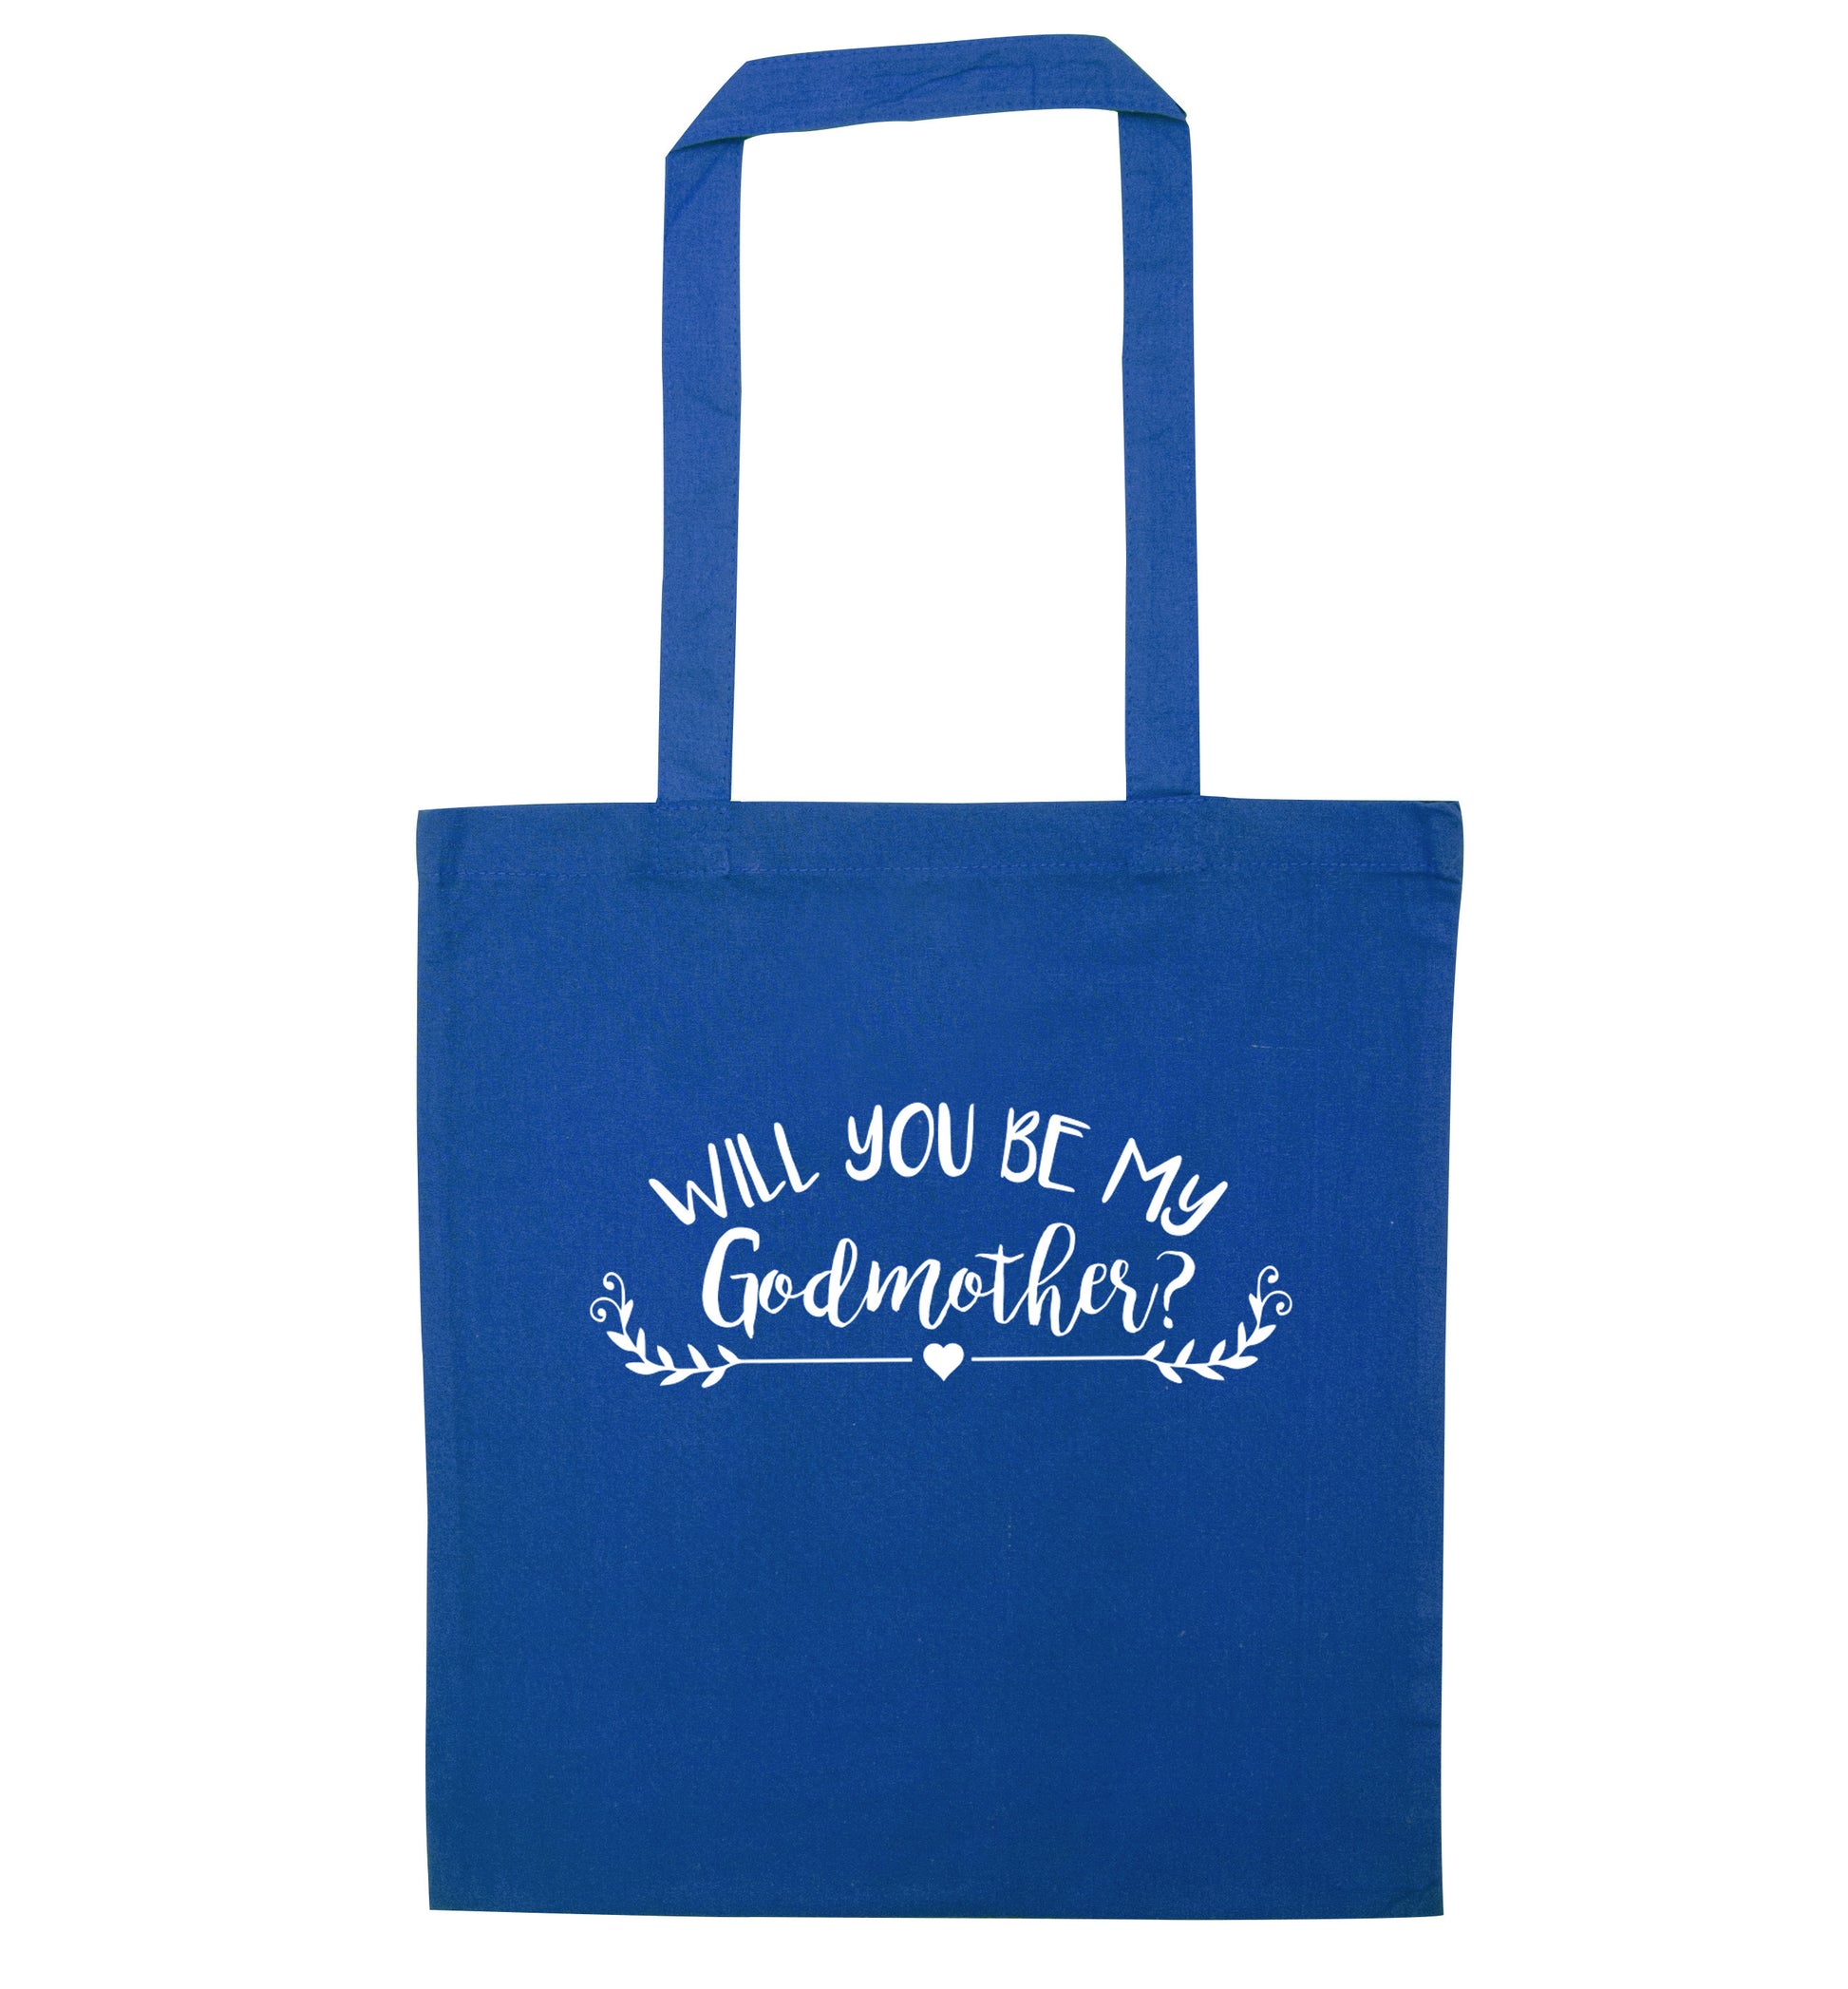 Will you be my godmother? blue tote bag